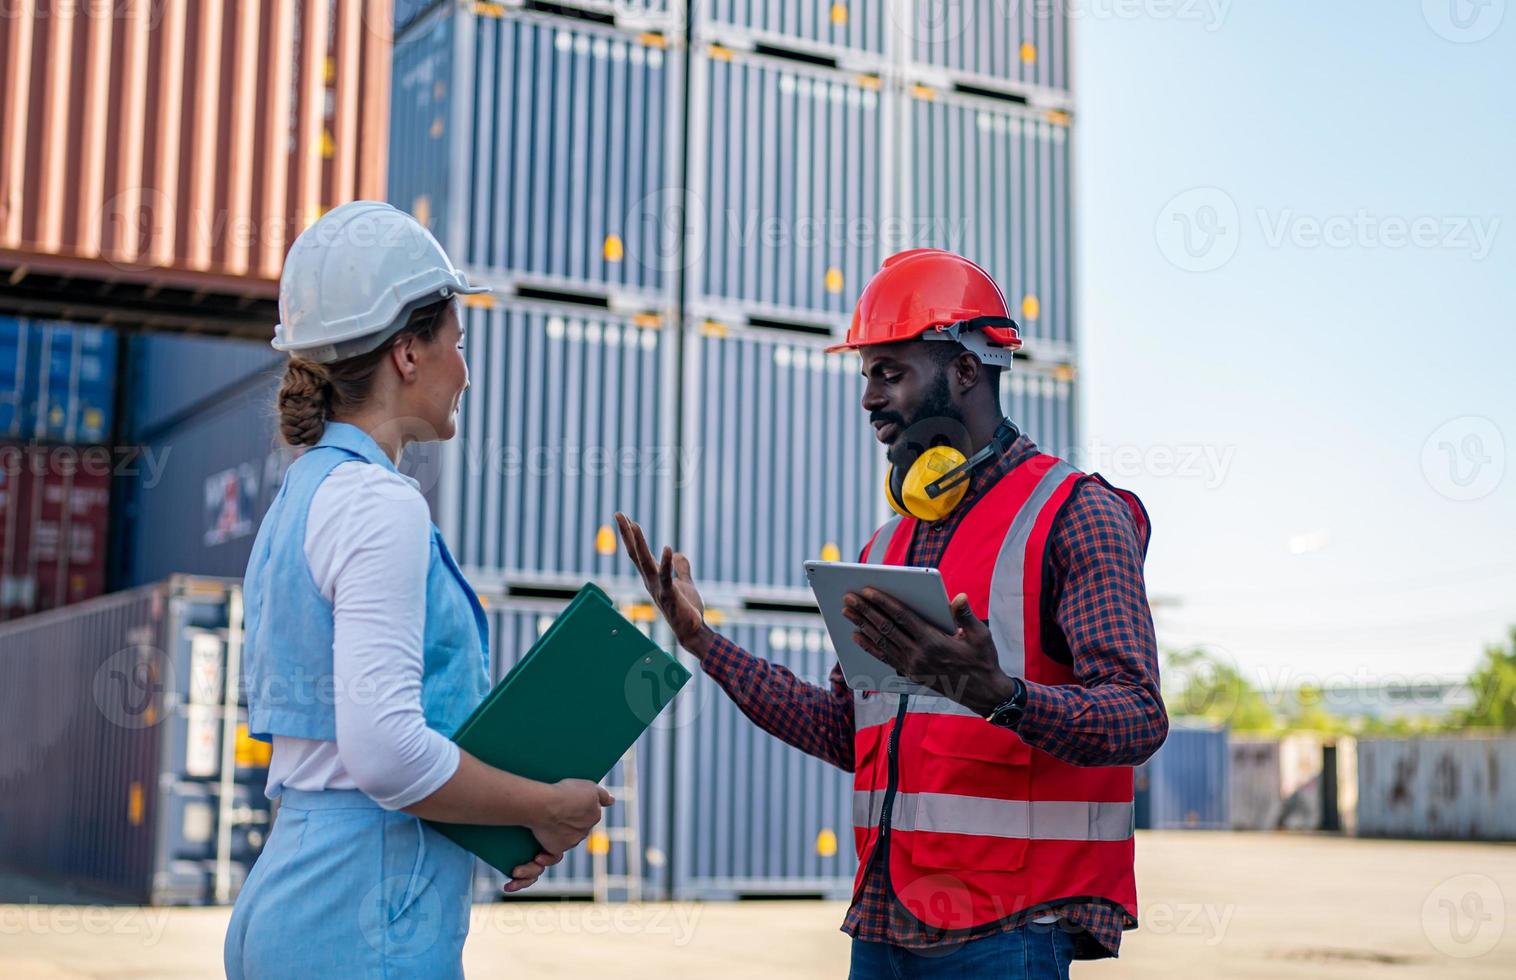 Foreman checking containers in the terminal, at import and export business logistic company. photo